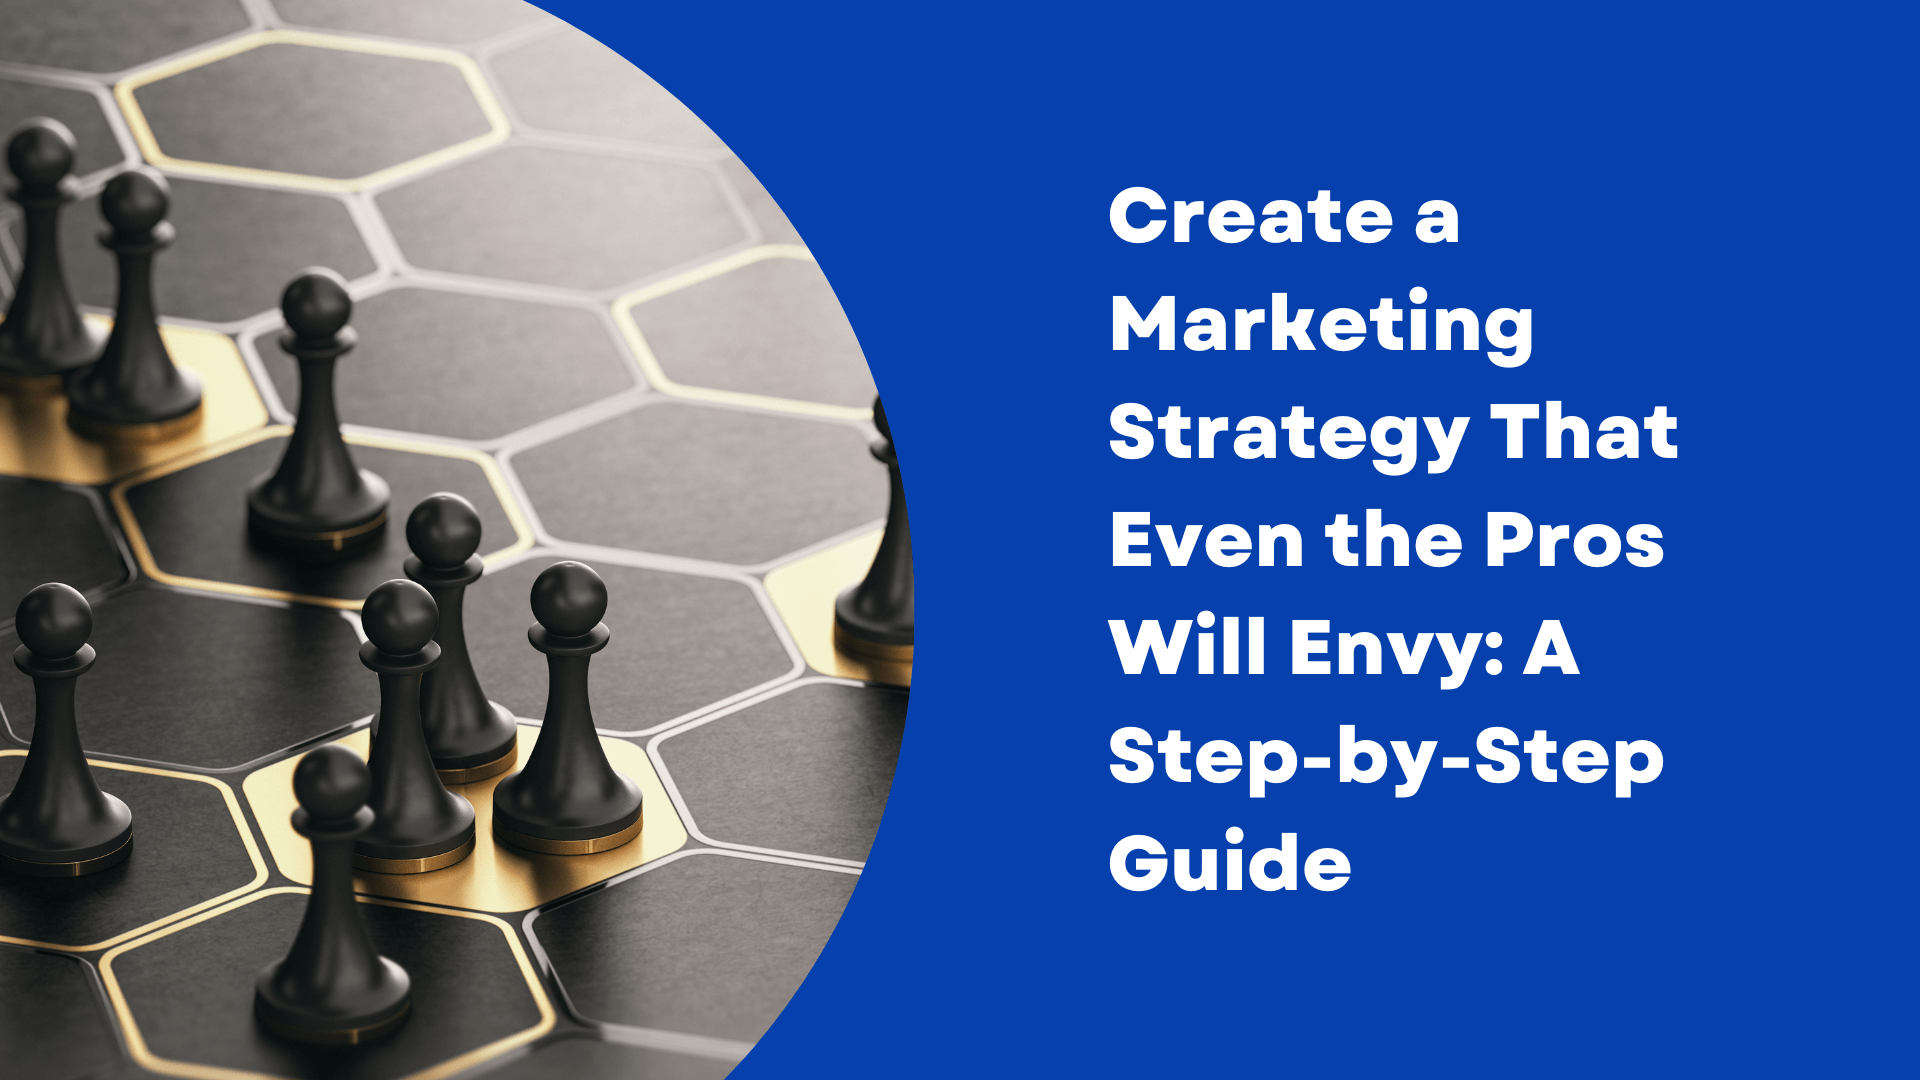 Create a Marketing Strategy That Even the Pros Will Envy: A Step-by-Step Guide